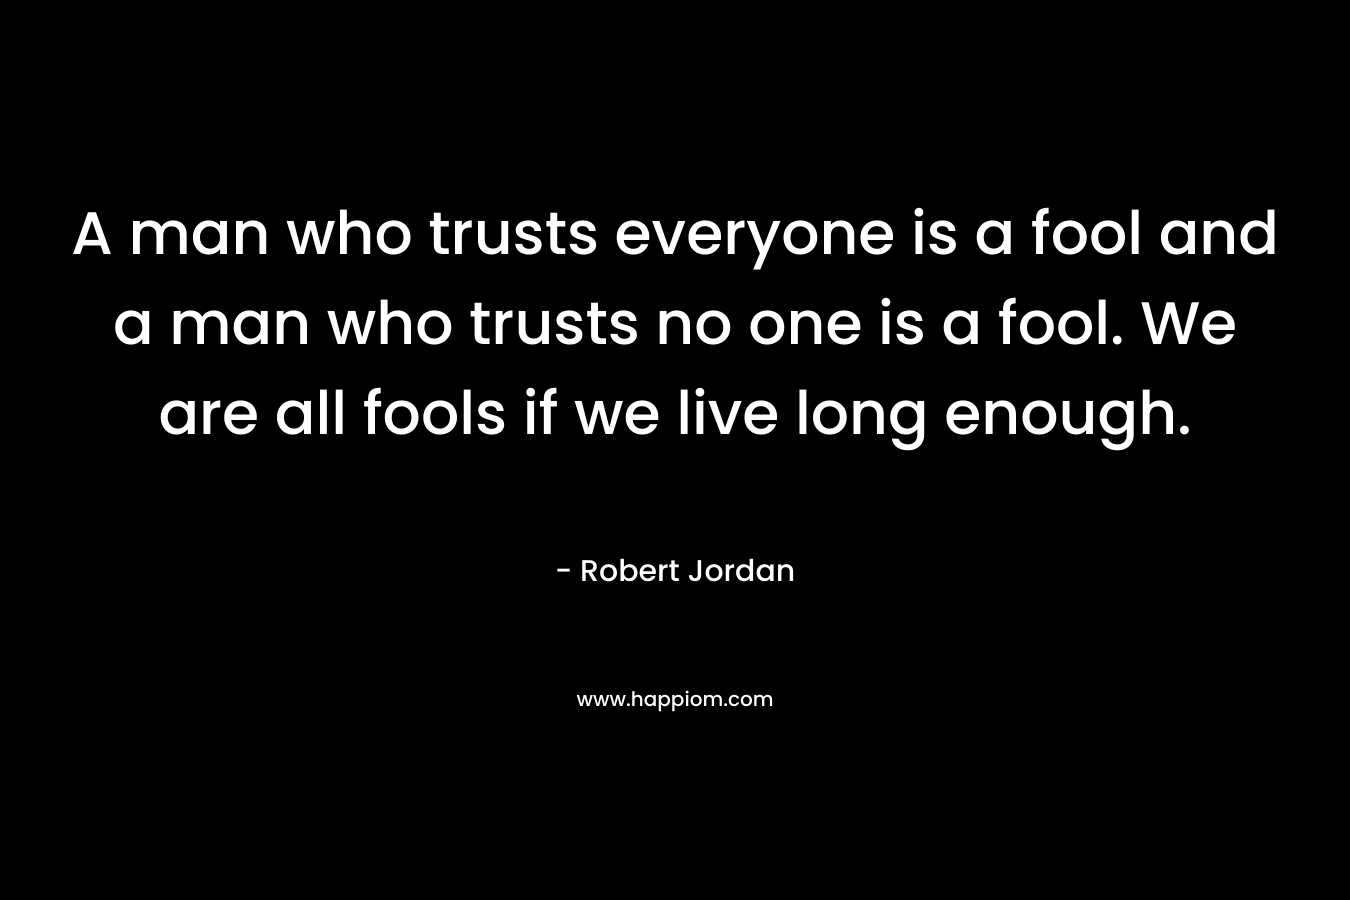 A man who trusts everyone is a fool and a man who trusts no one is a fool. We are all fools if we live long enough.